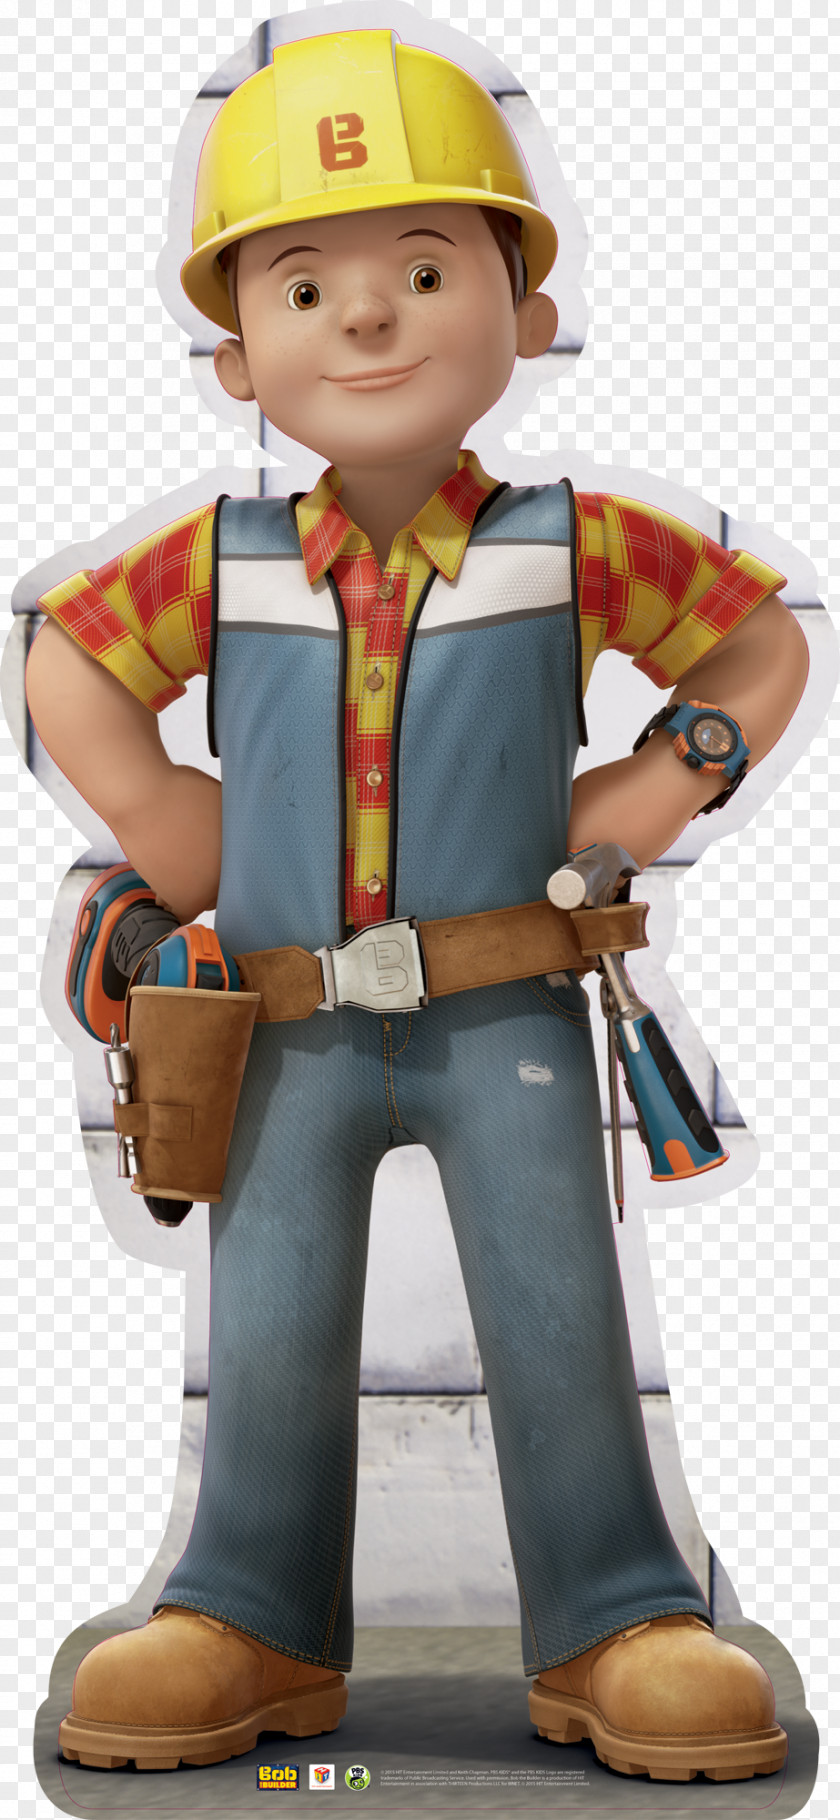 Builder Bob The Cloth Napkins Child Architectural Engineering Character PNG